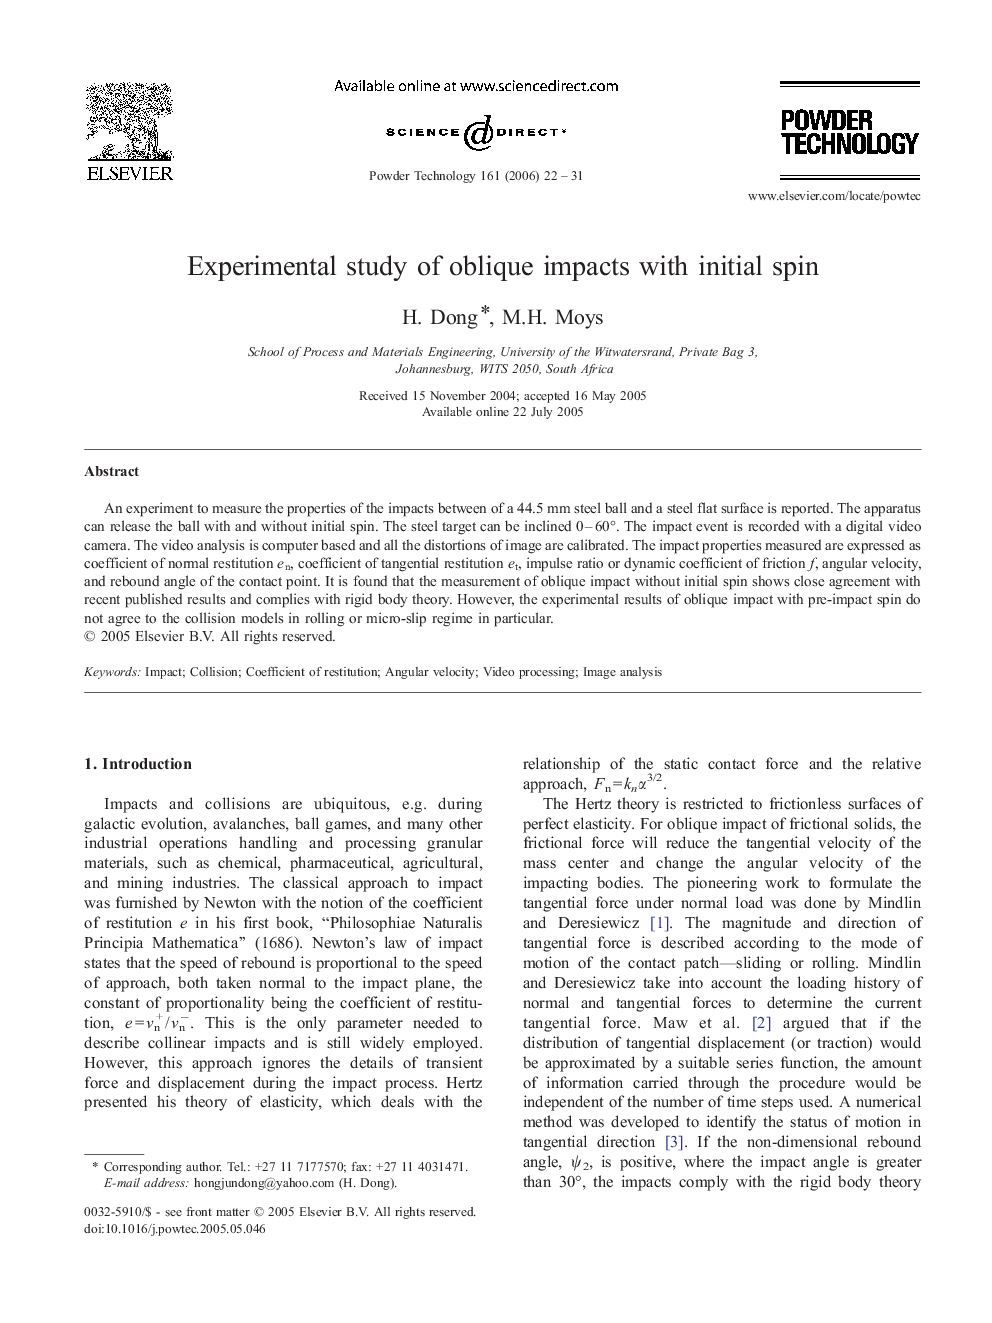 Experimental study of oblique impacts with initial spin